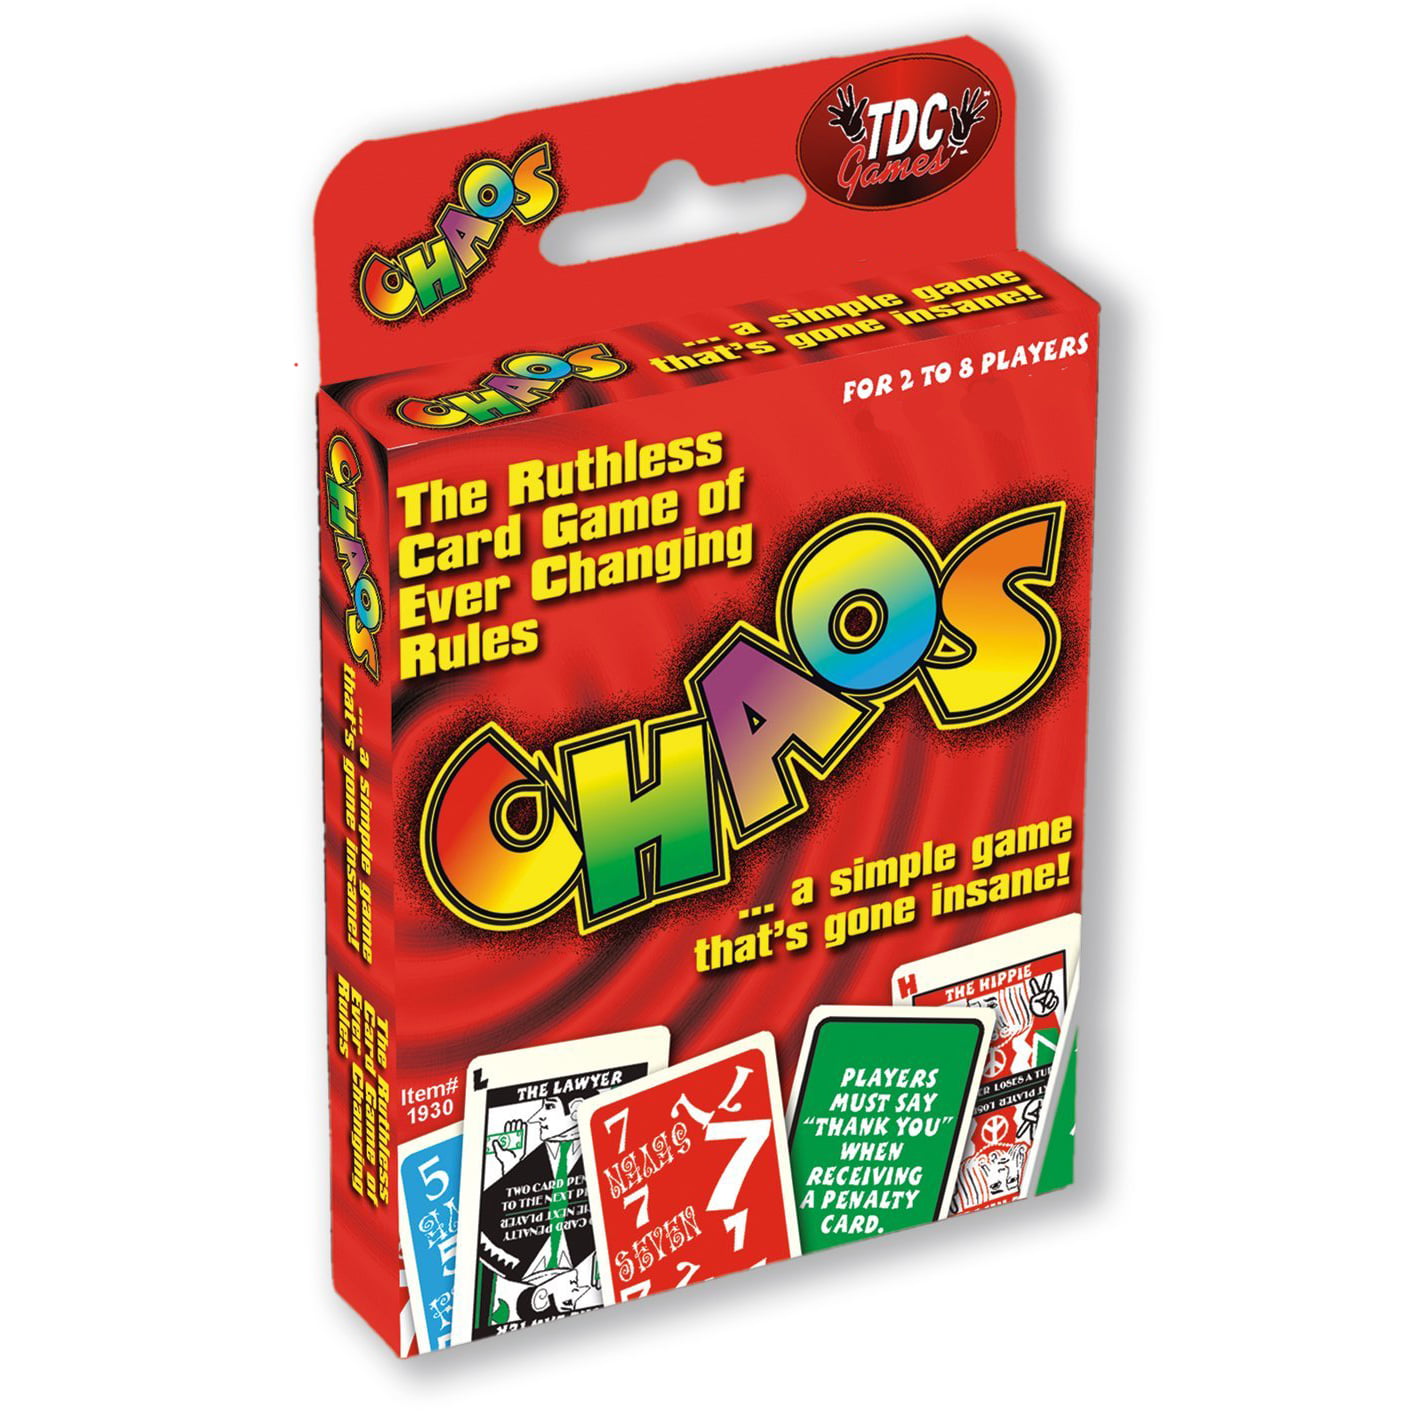 Details about   Uno Dos Tres Educational Card Games for Kids Age 8 & Above,Free Shipping 